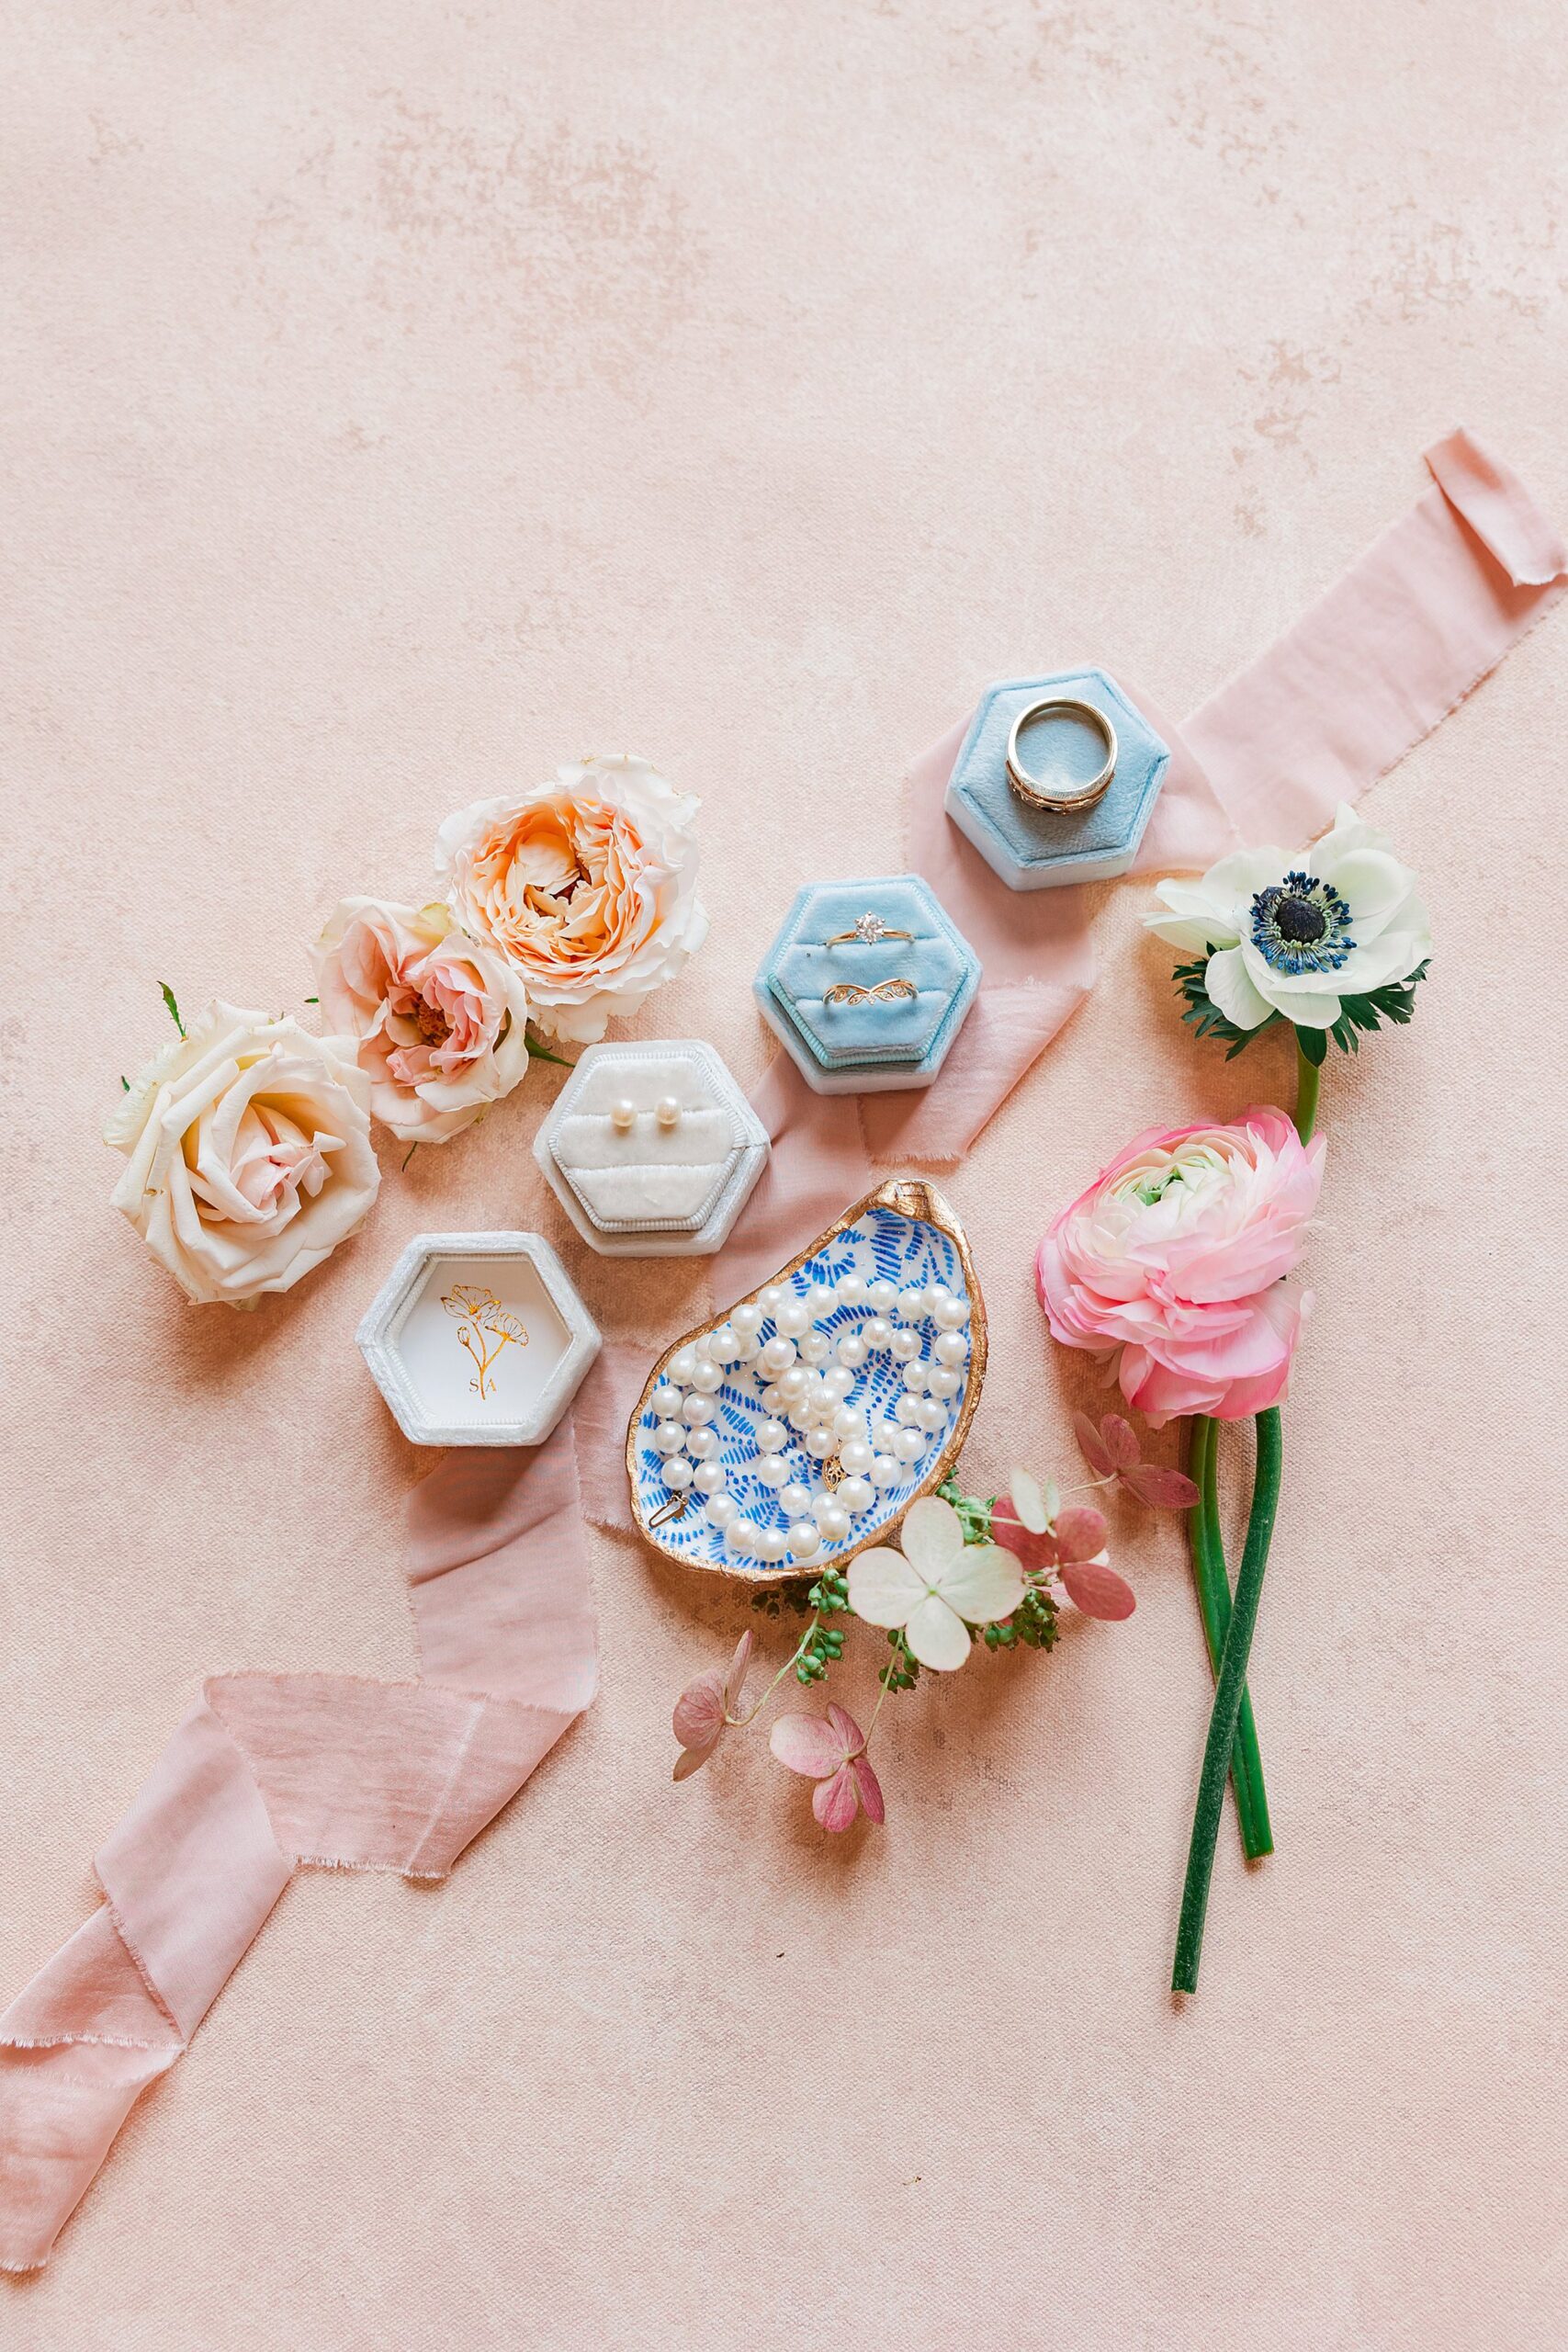 Bridal details shot that involves ribbons, florals, ring boxes, and oyster dish